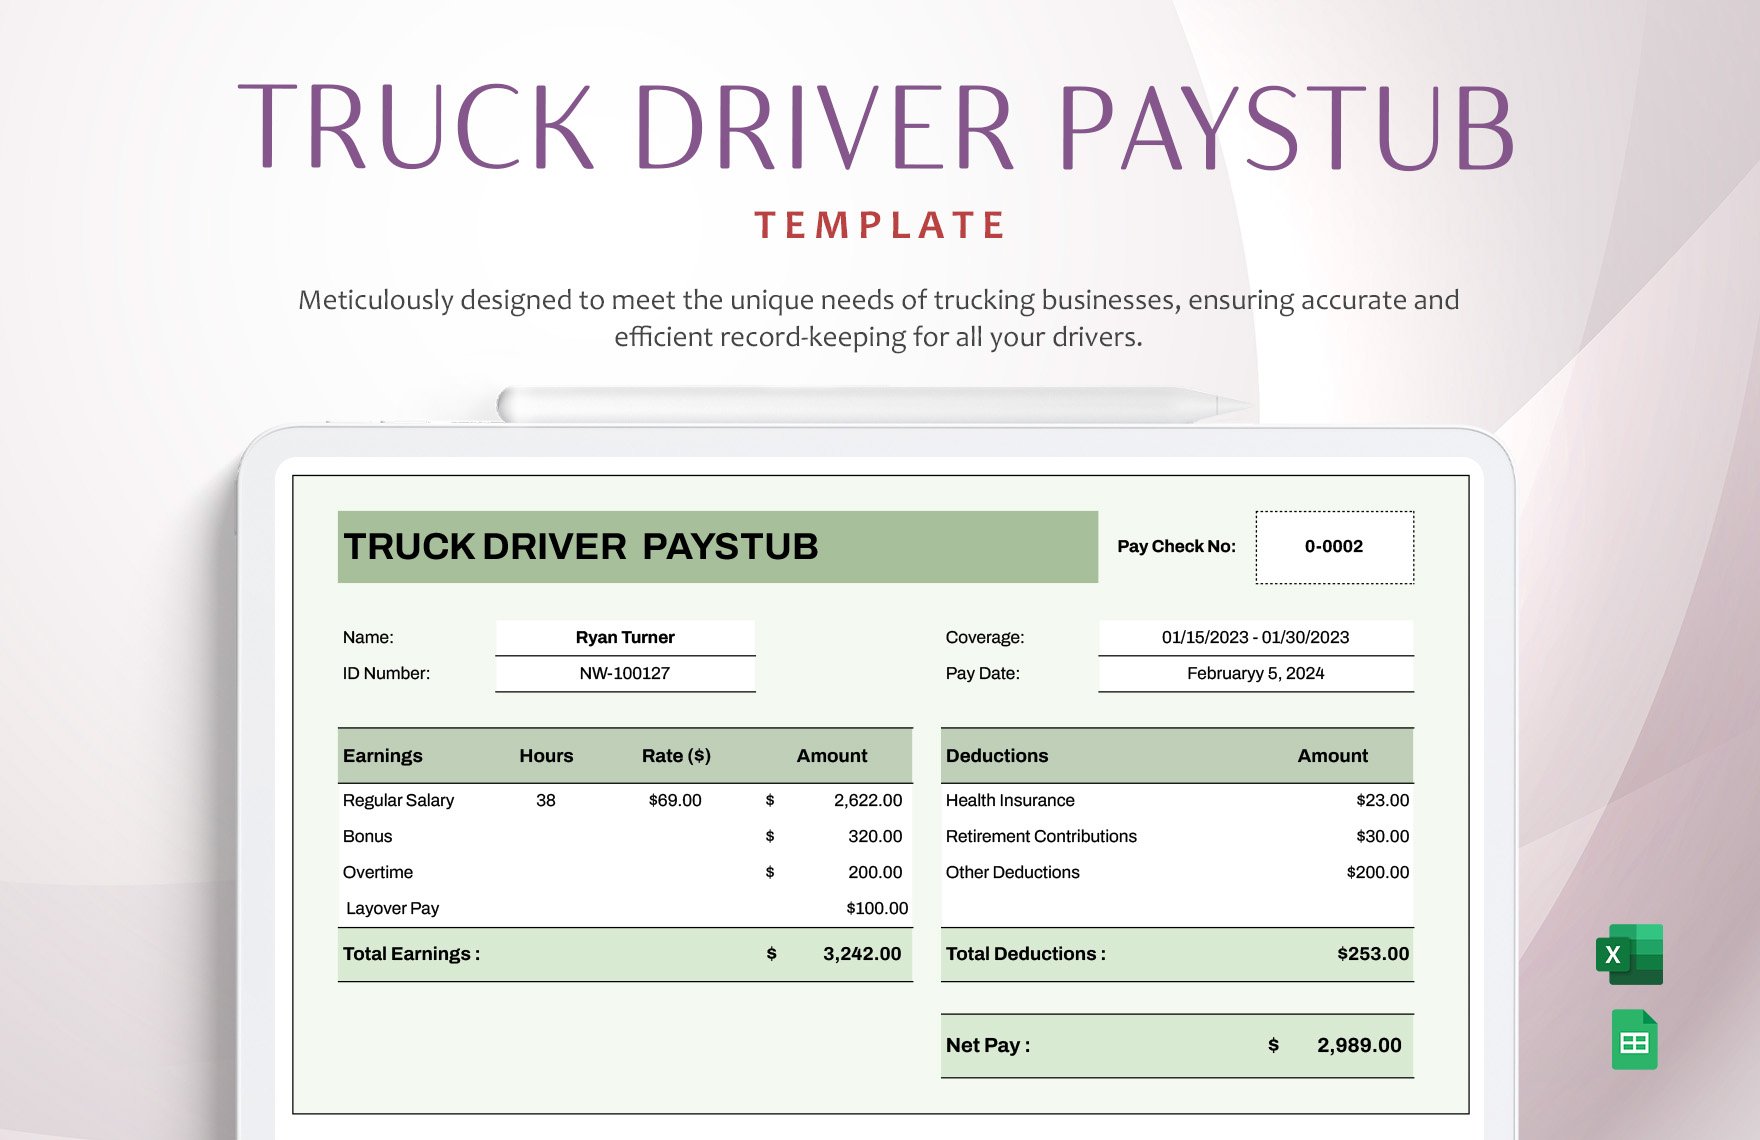 Truck Driver Paystub Template in Excel, Google Sheets